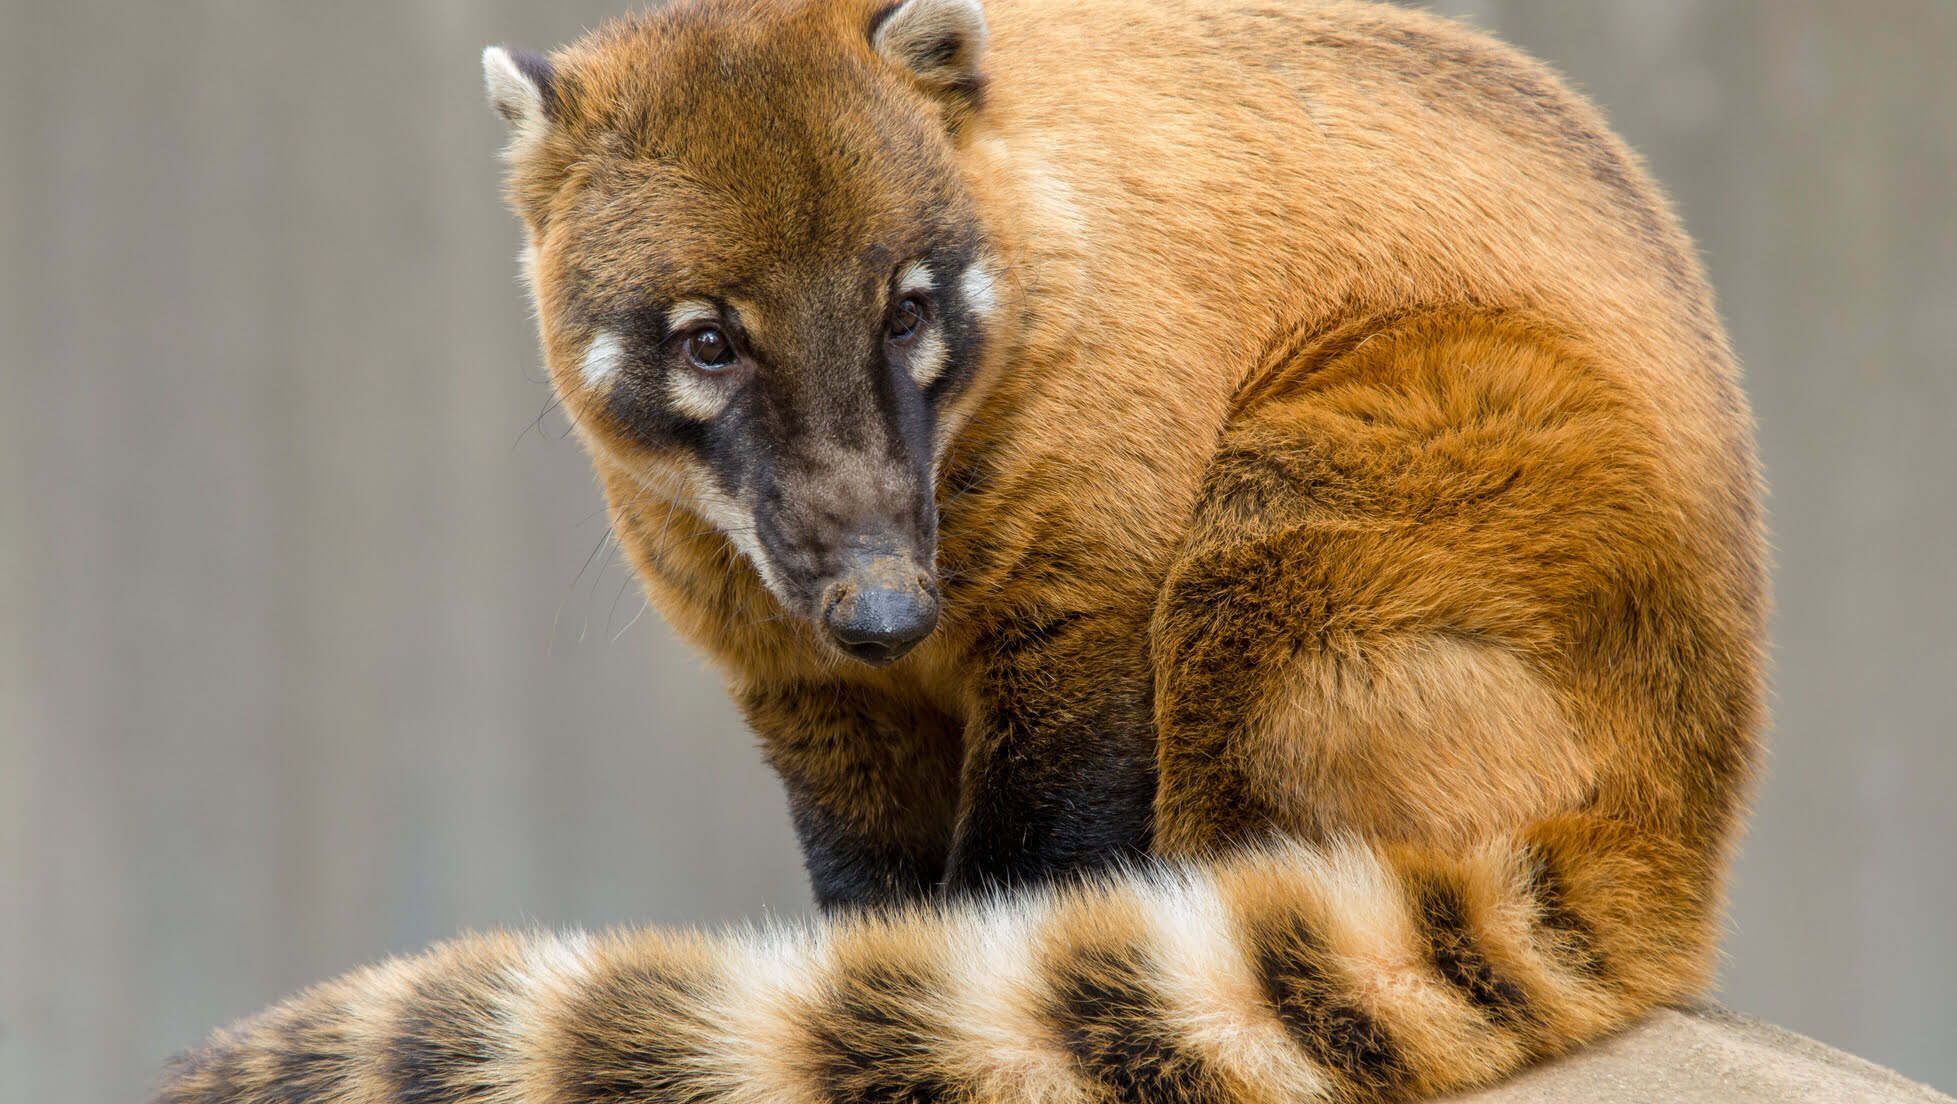 Mexican Lemur sitting on a rock - Animal Facts